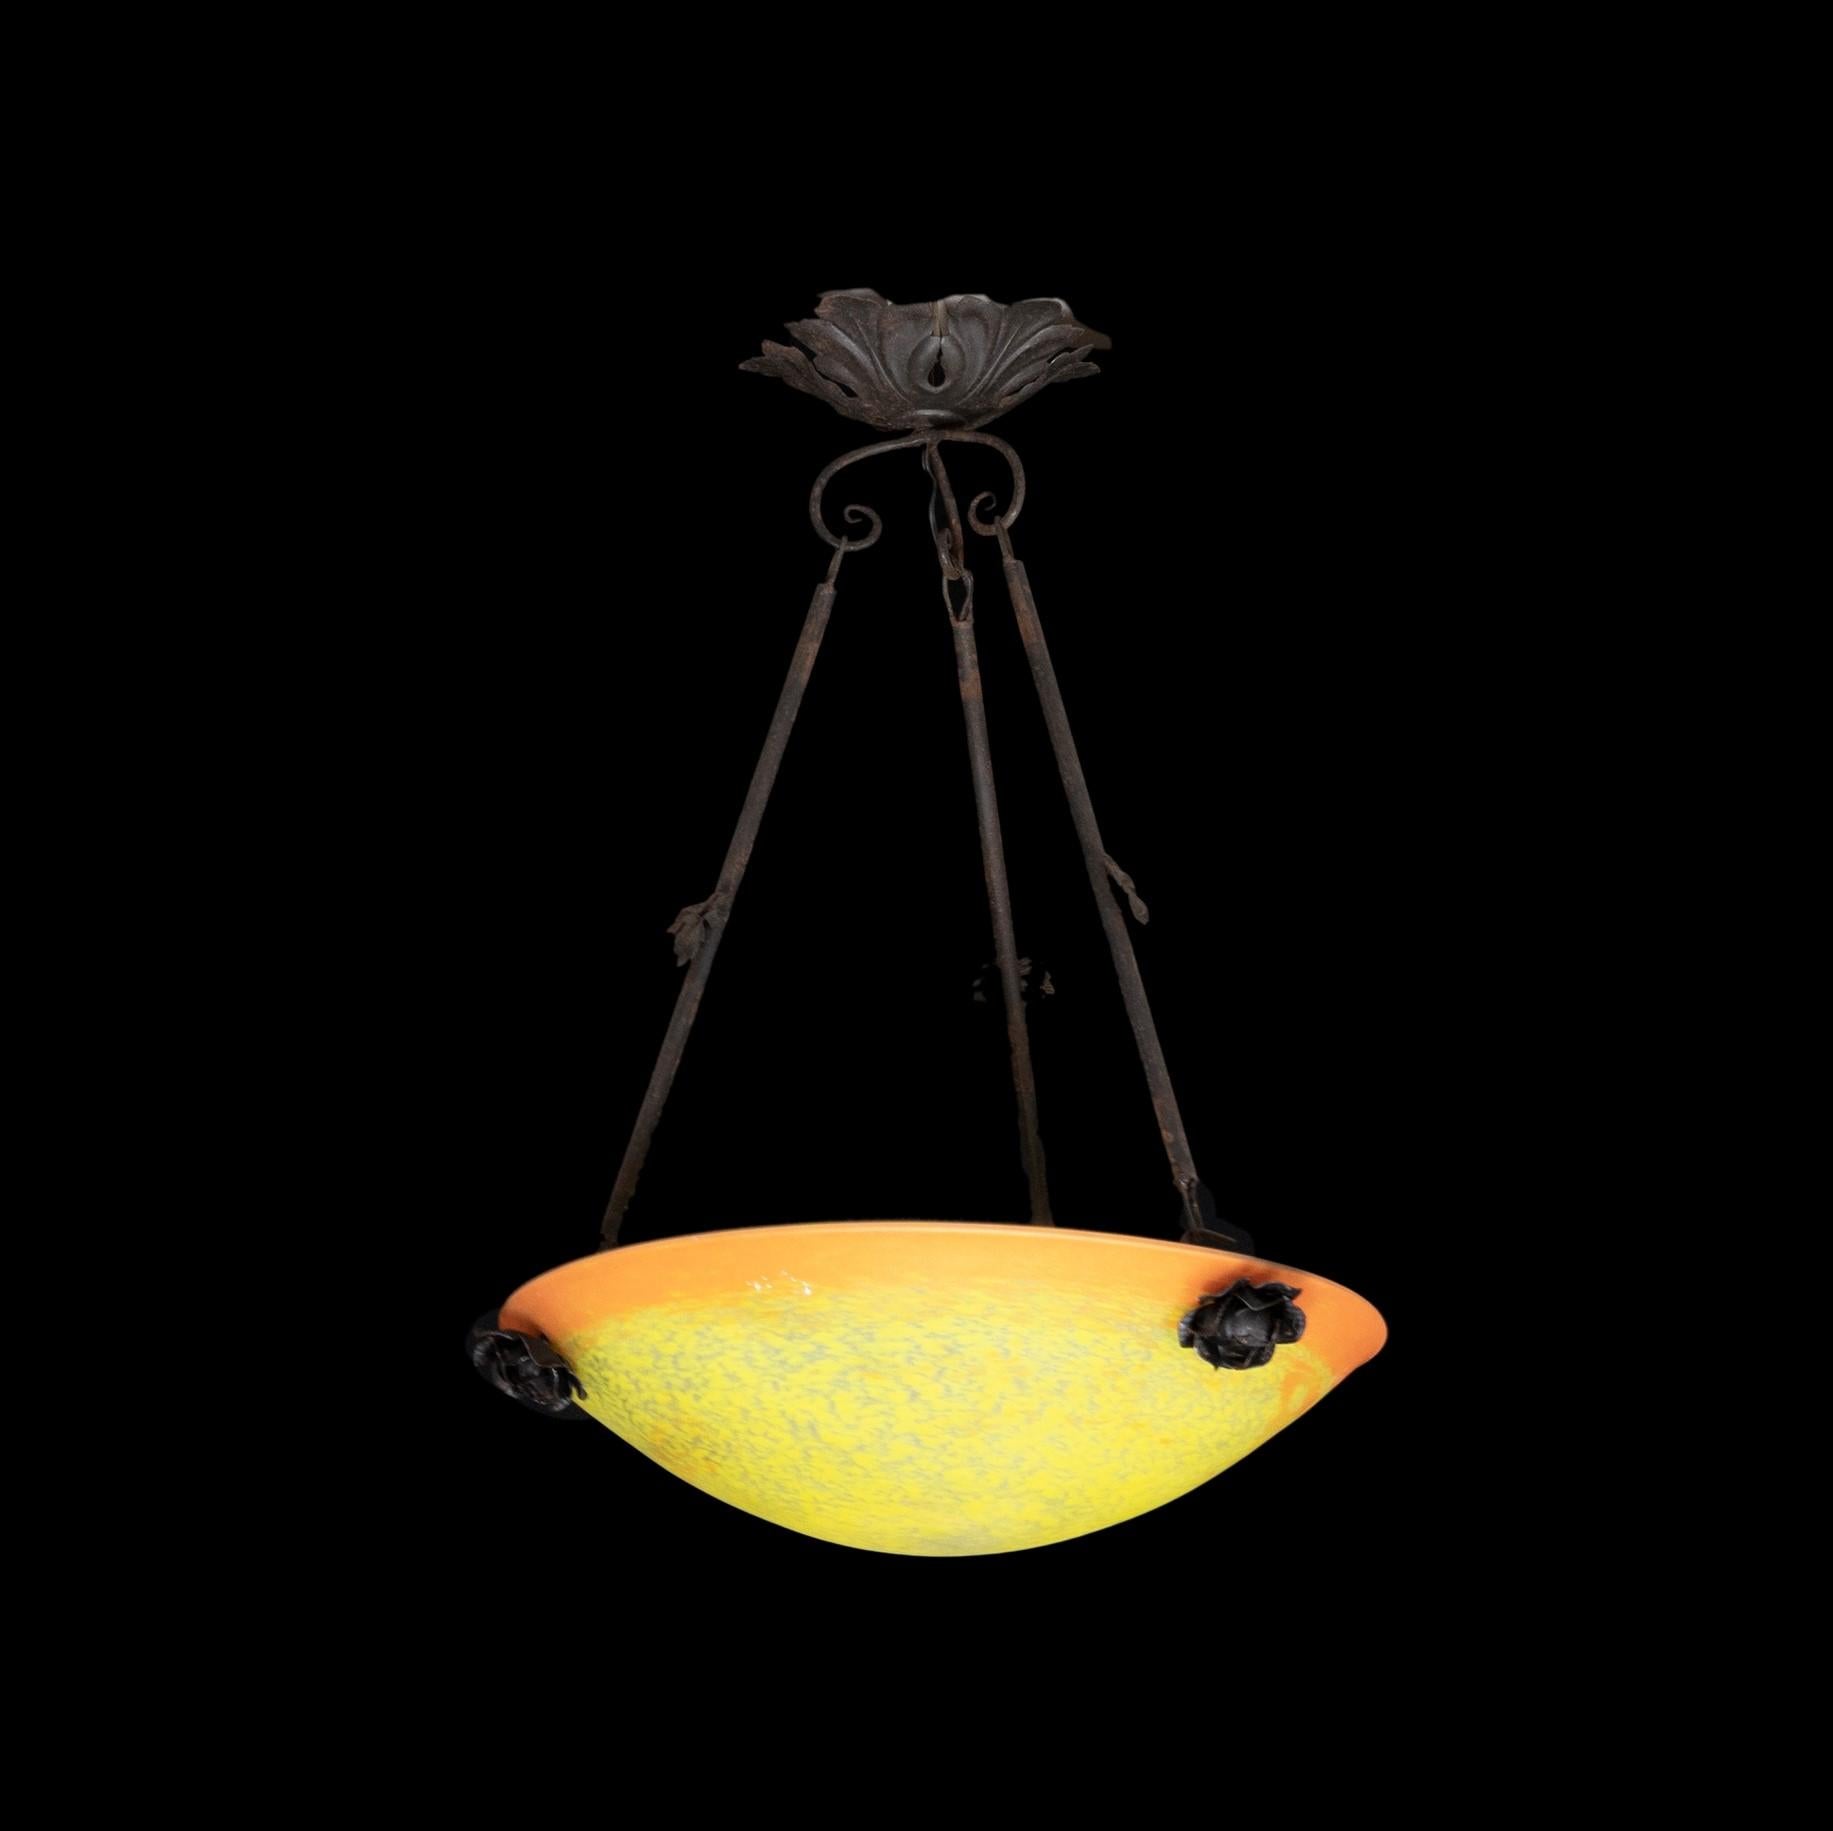 A chandelier with Nancy glass base in shades of yellow and orange mounted on wrought iron. In woriking conditions. Reviewd recently. Height adjustable from 1m to 55 cm.
Dimensions: length 38 cm height 55 cm - adjustable height to 155 cm

The